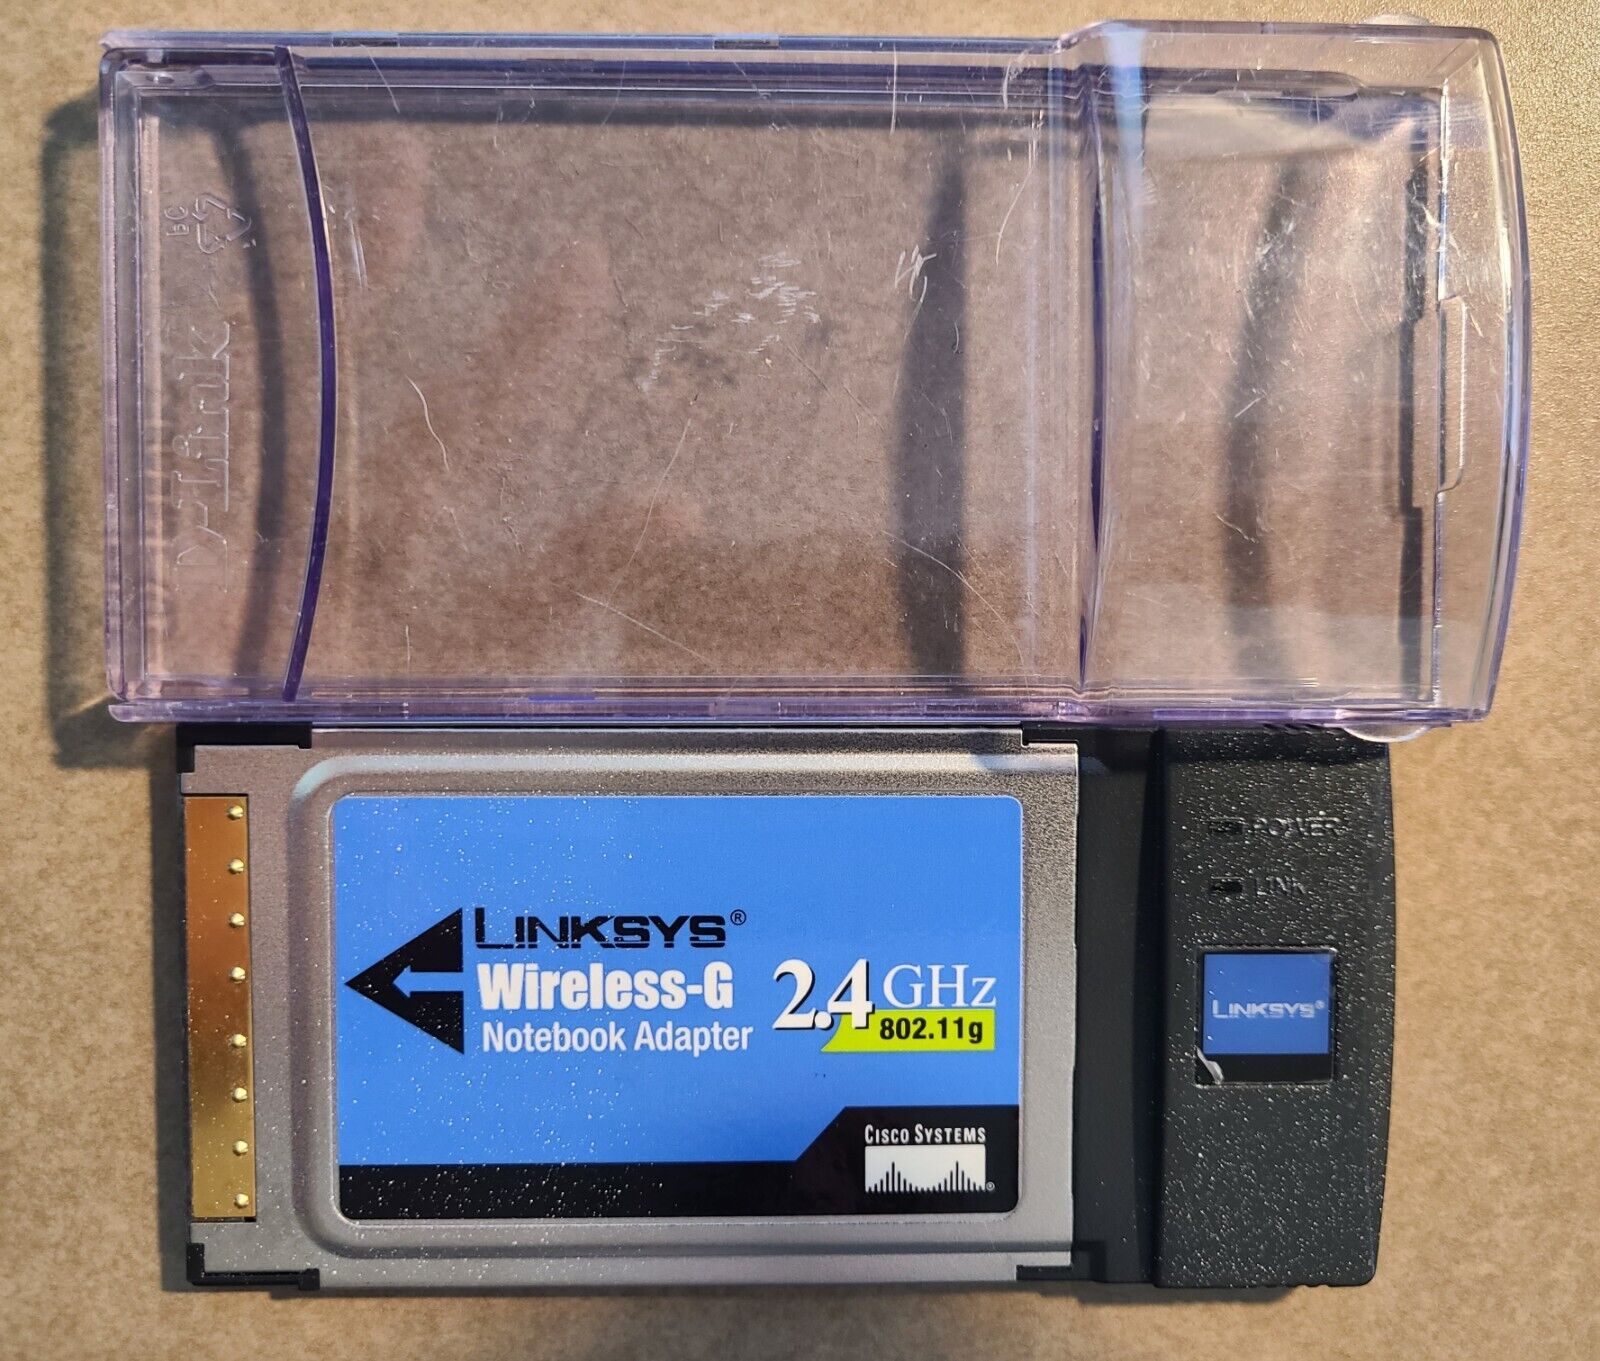  LINKSYS WPC54G PCMCIA WiFi 802.11g Adapter -  Pre-Owned, Tested, GC 